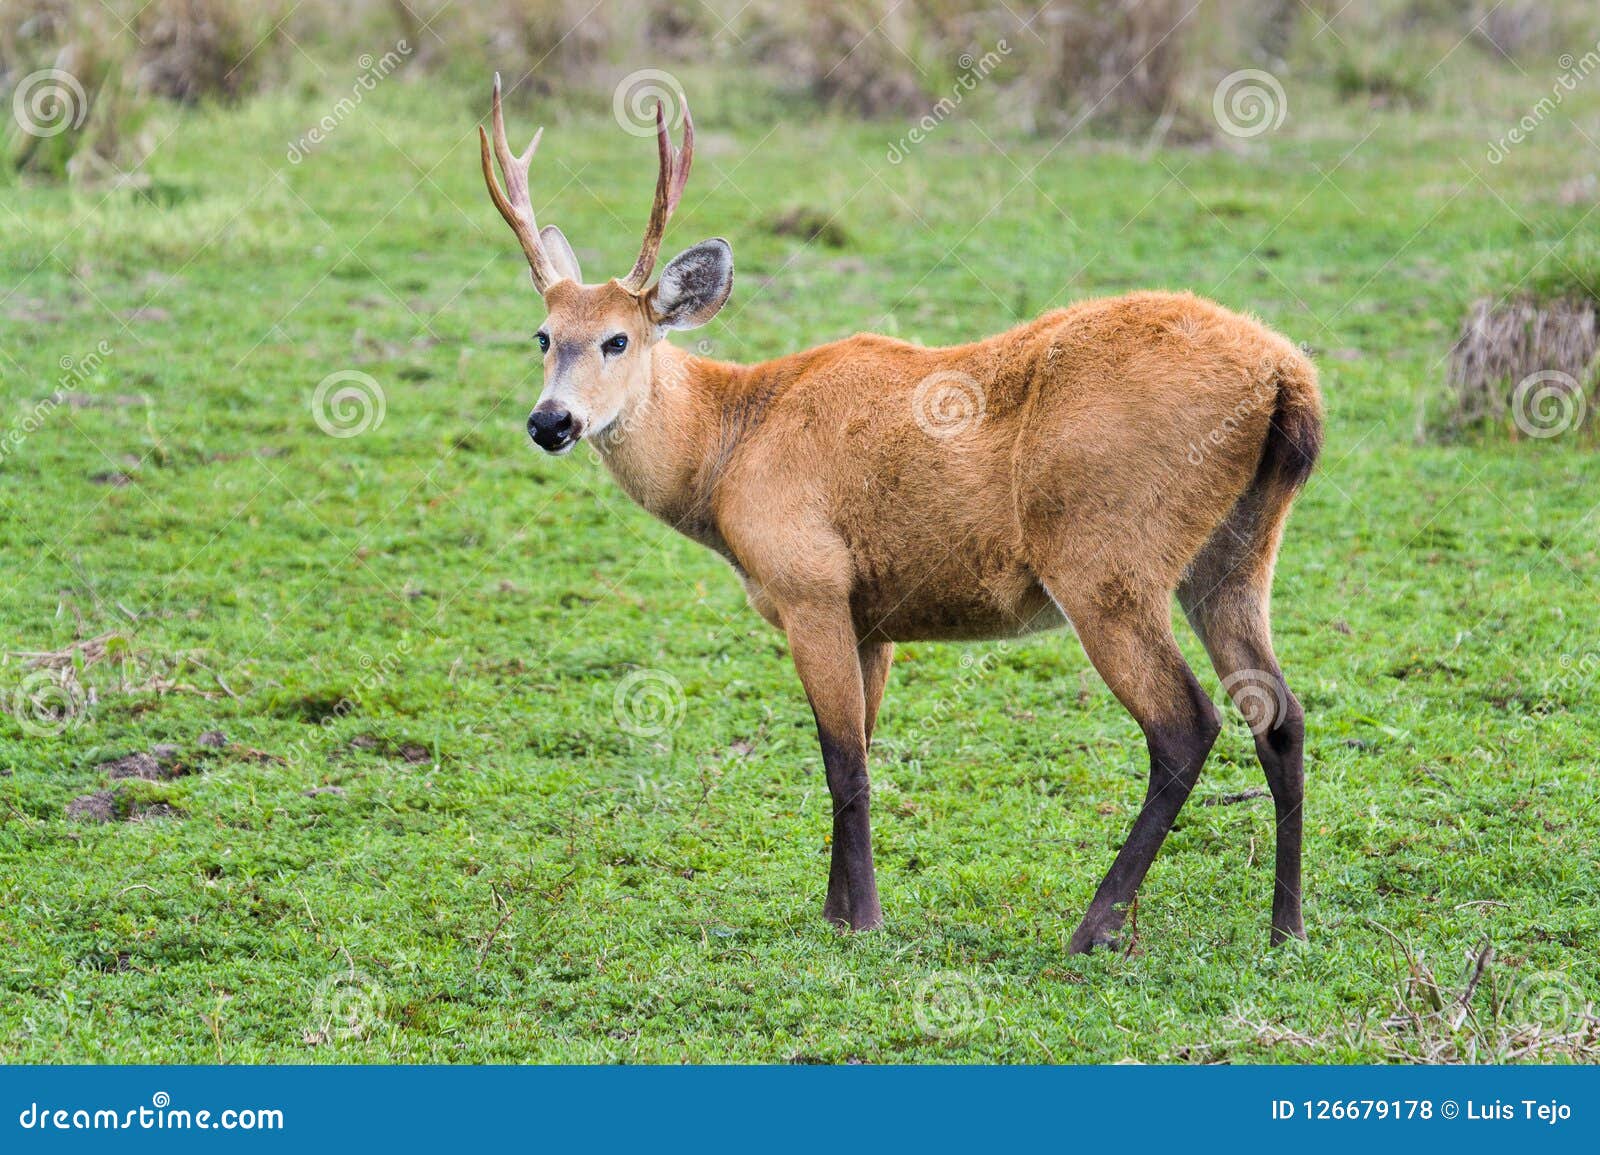 a young marsh deer photographed in argentina